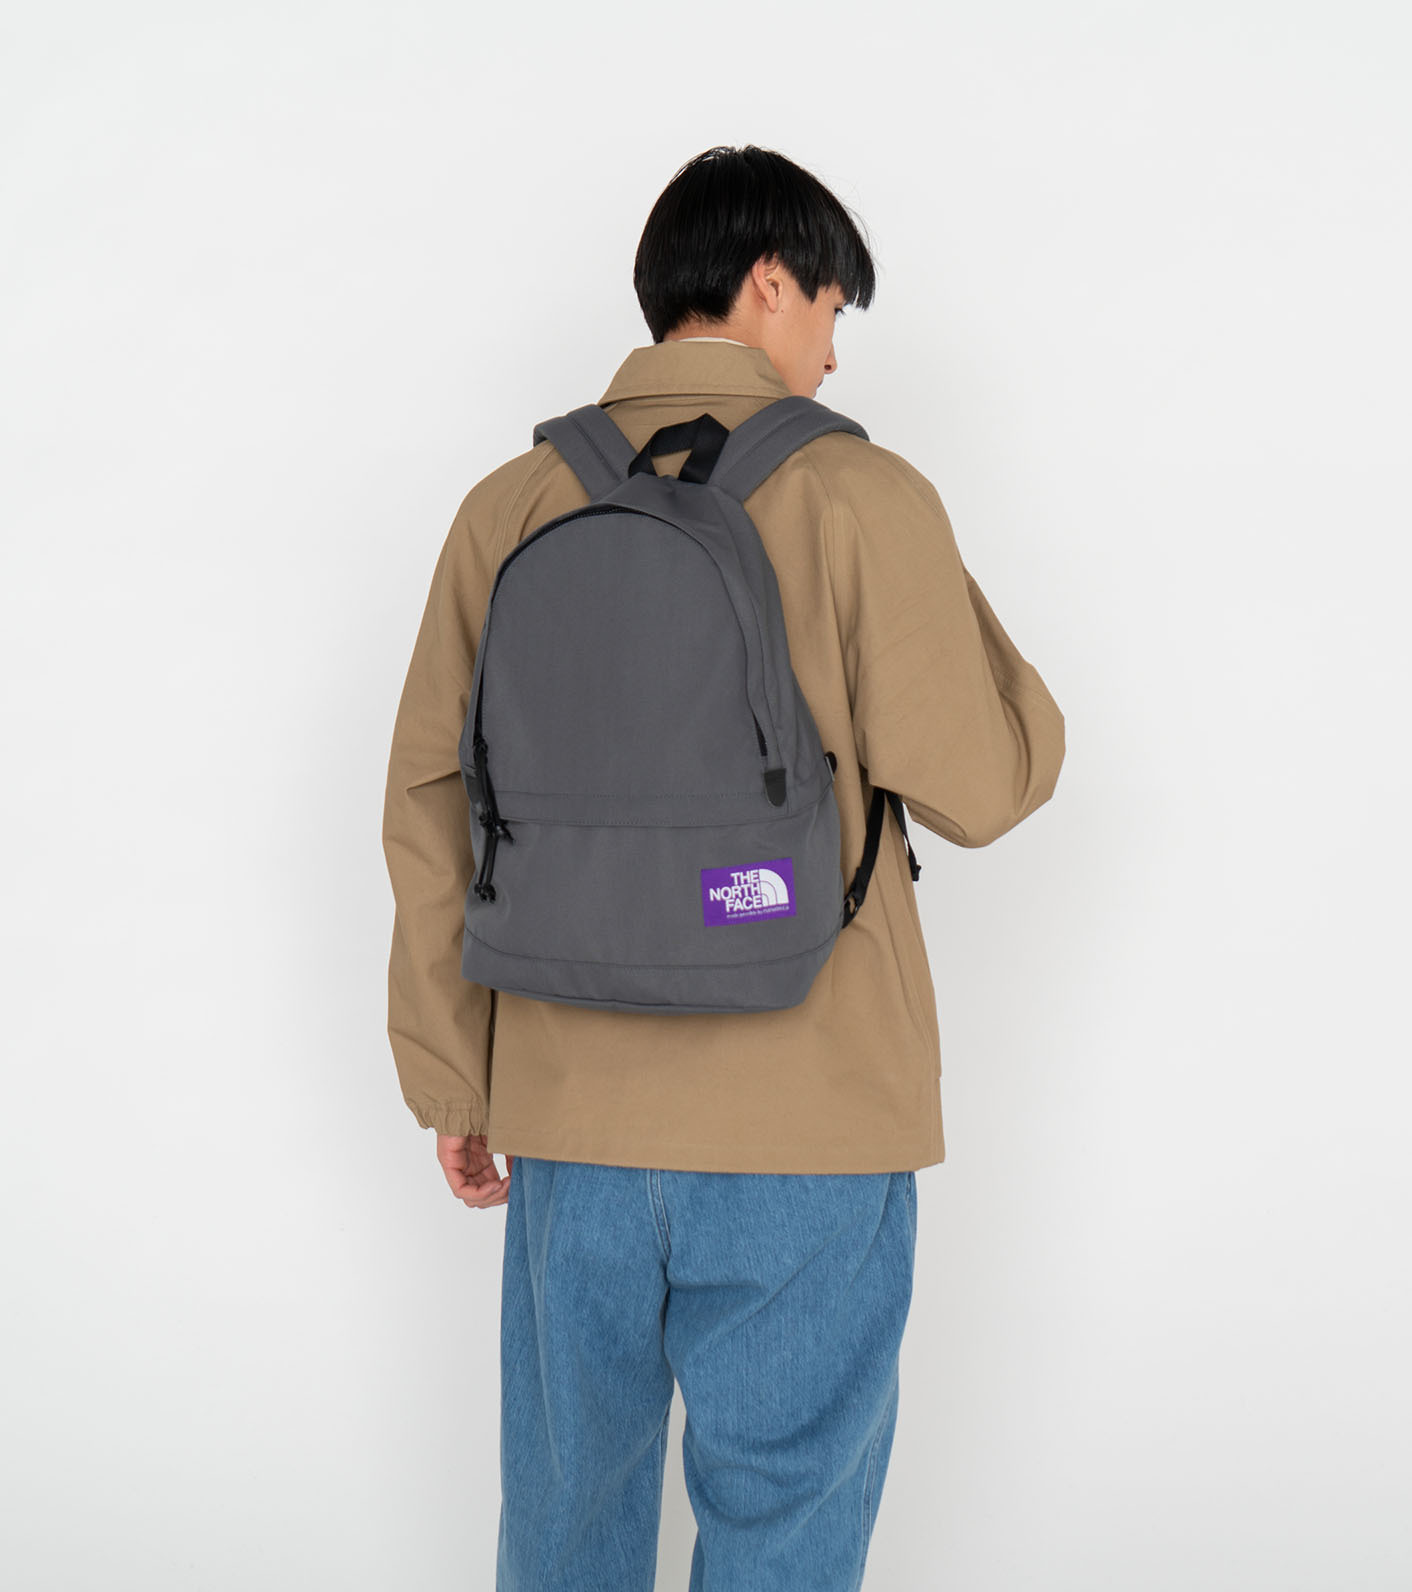 THE NORTH FACE PURPLE LABEL 日本限定紫標Field Day Pack 後背包